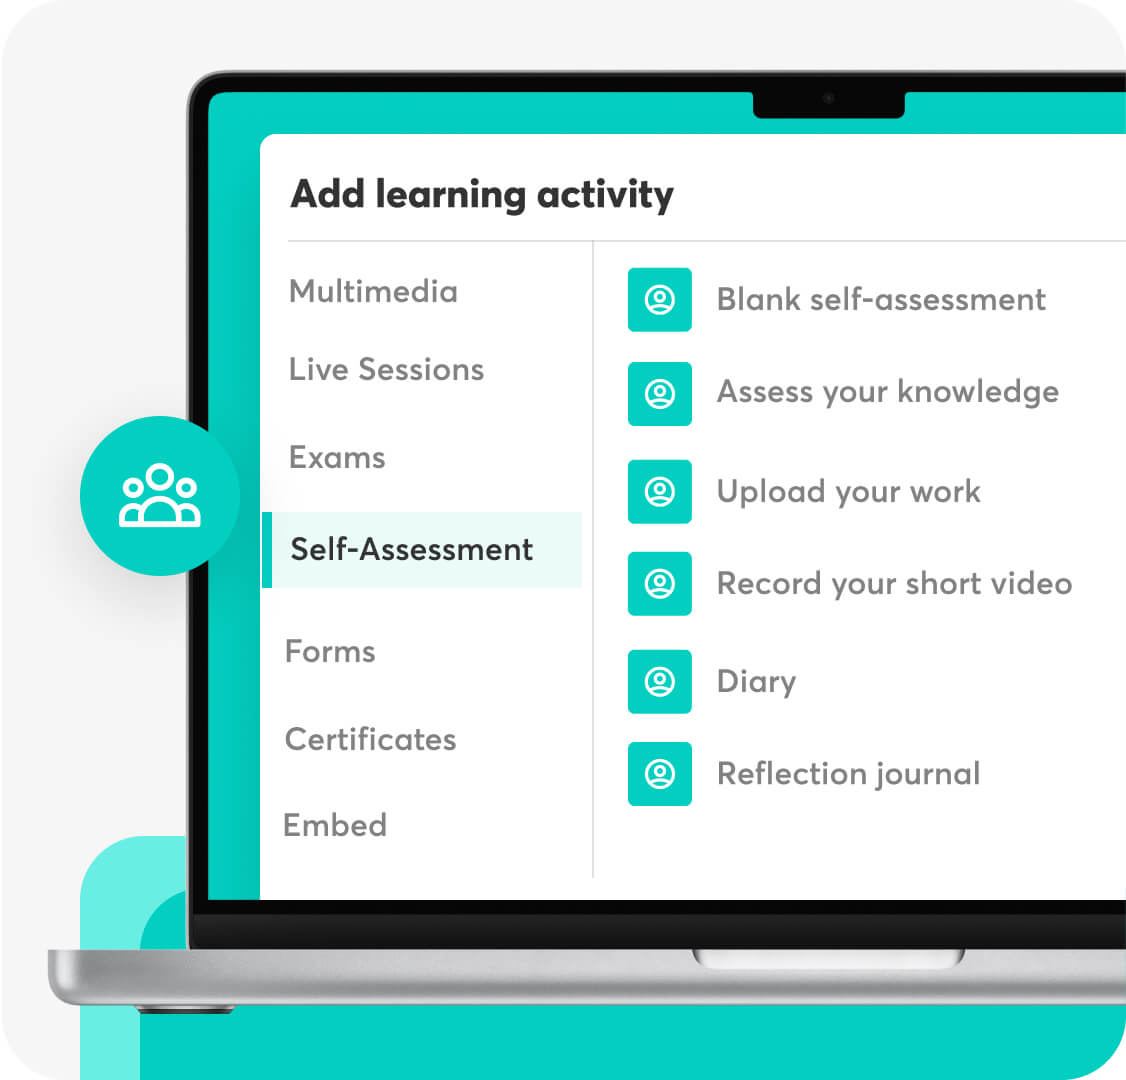 Learning activities you can have on LearnWorlds including self-assessments, quizzes, multimedia, live sessions, exams etc.